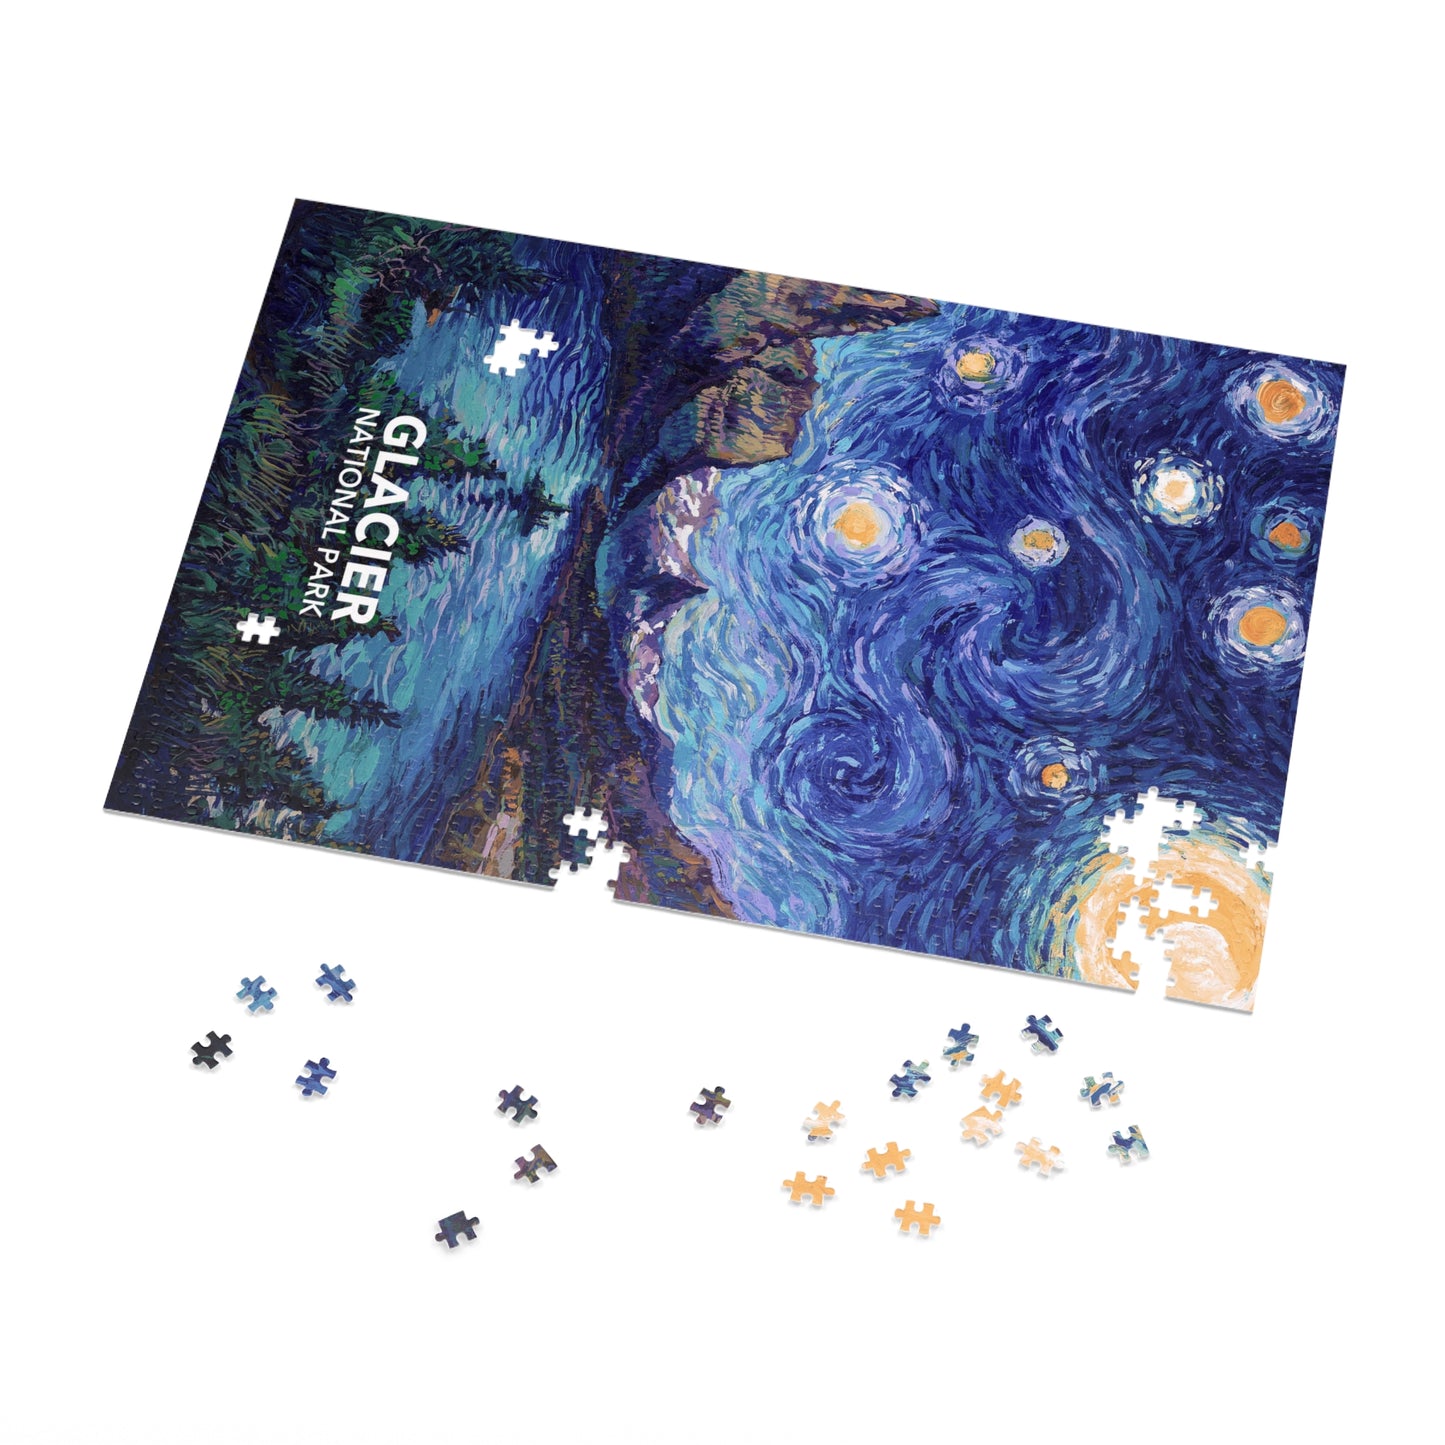 Glacier National Park Jigsaw Puzzle - The Starry Night